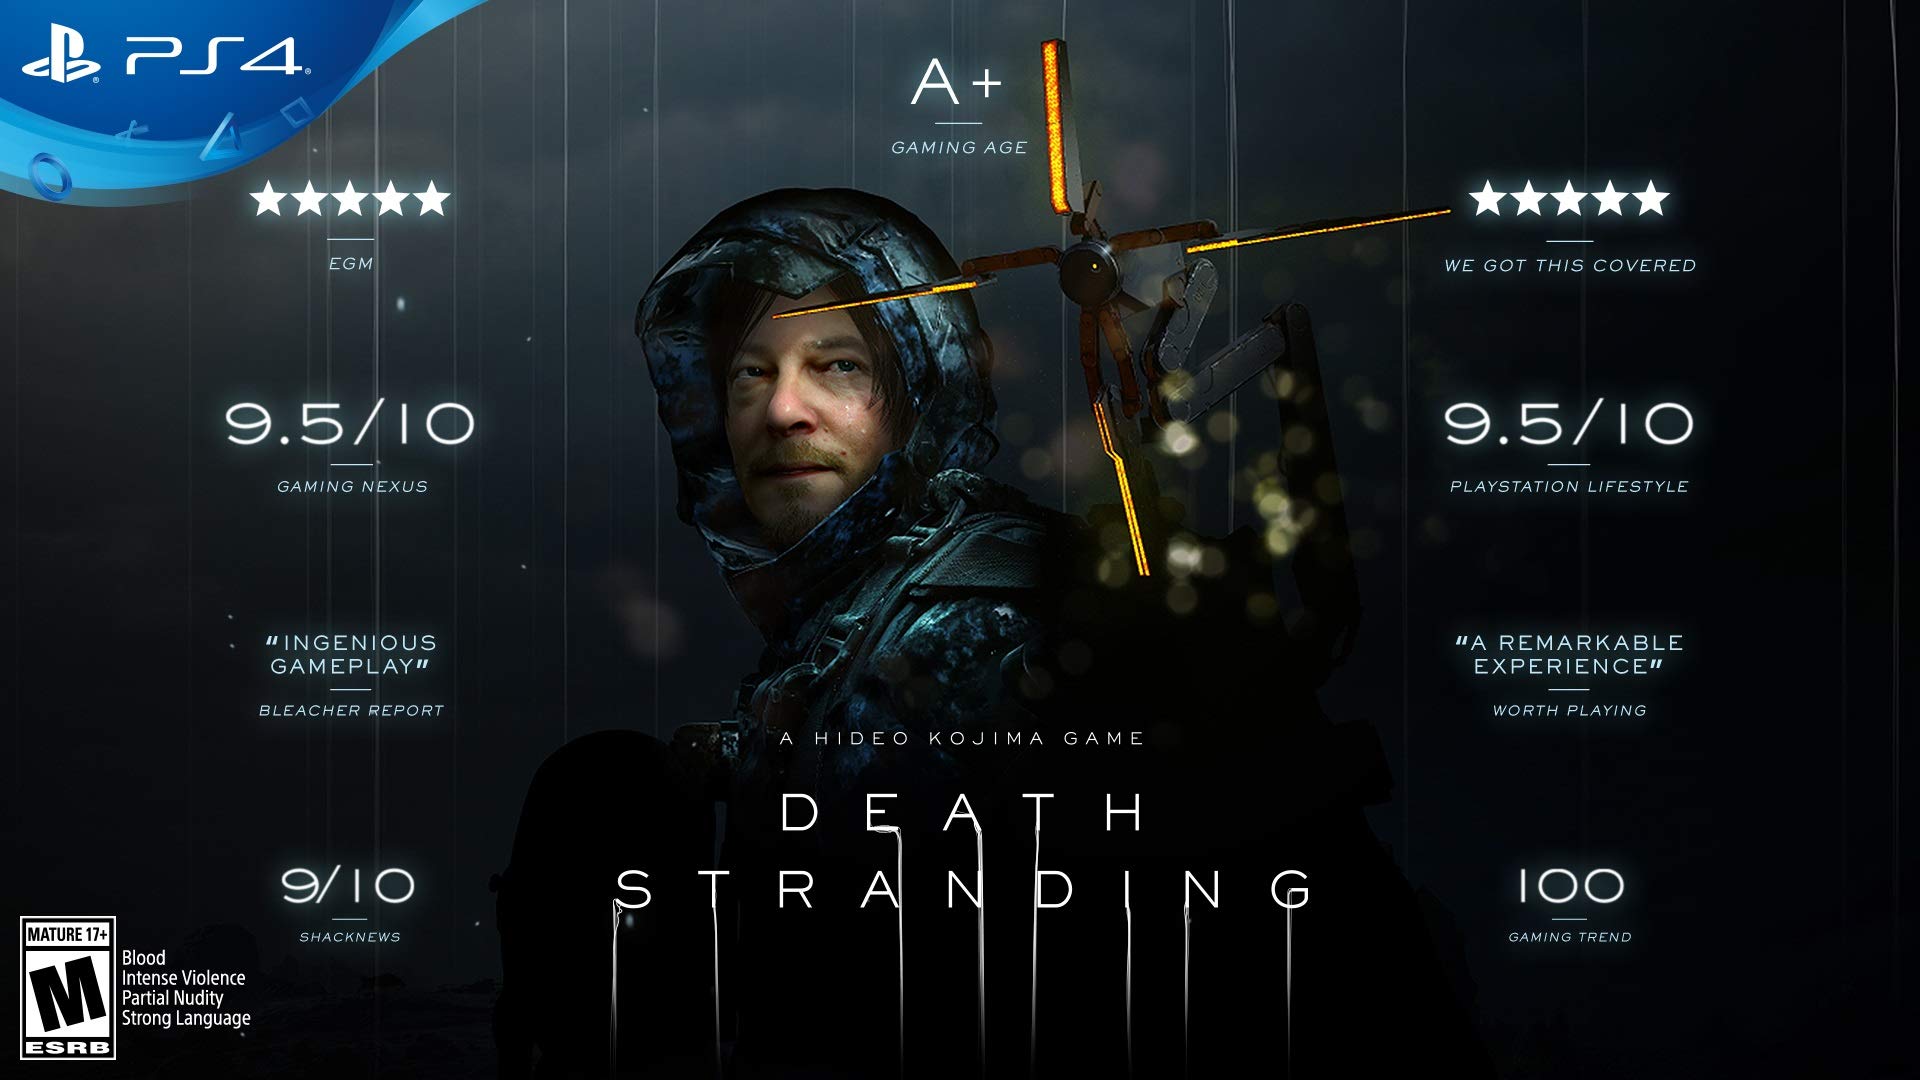 Death Stranding Collector's Edition - (PS4) PlayStation 4 Video Games Kojima Productions   